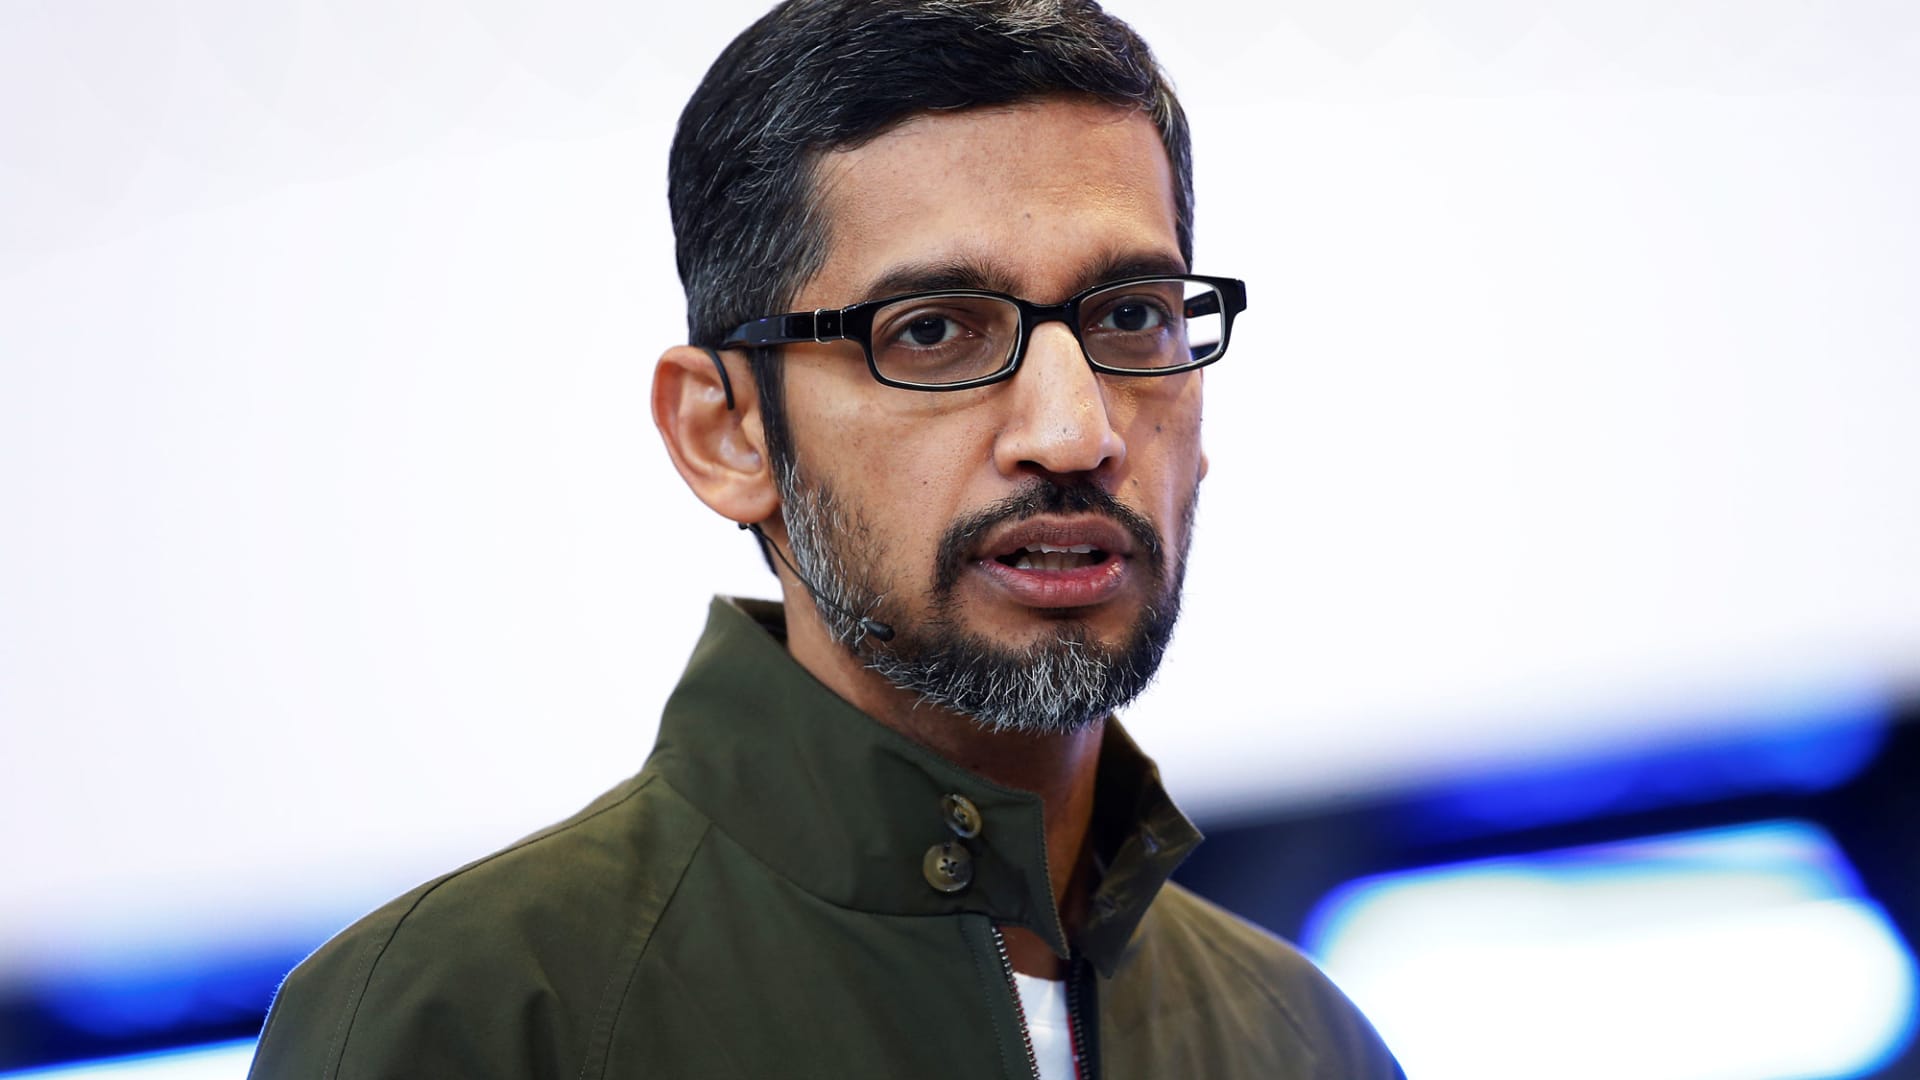 Google has avoided mass layoffs so far, but employees worry their time may be coming